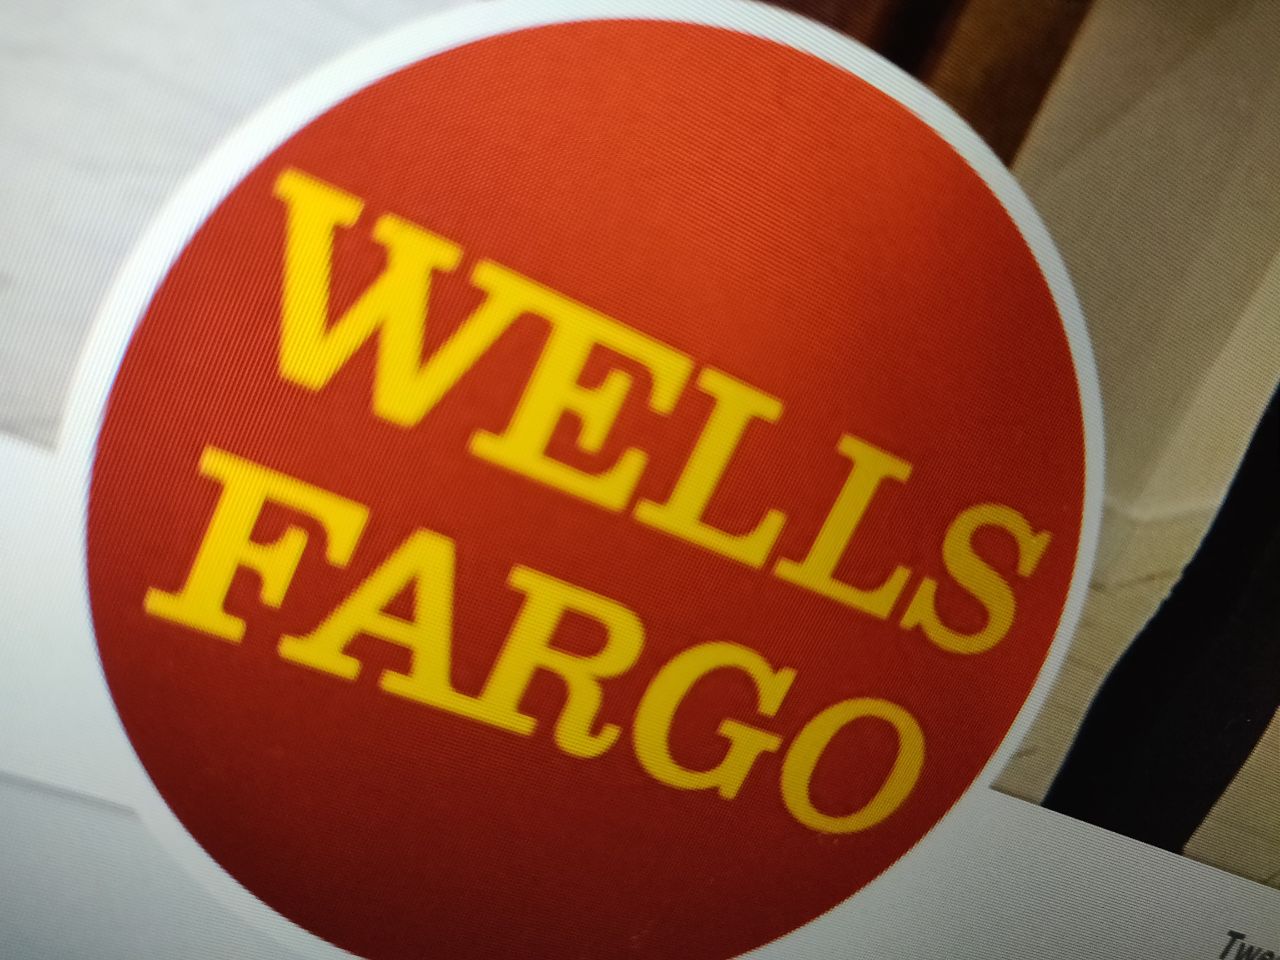 [Update: Aug. 25] Wells Fargo website app down and not working, online / mobile banking suffers - what happened?